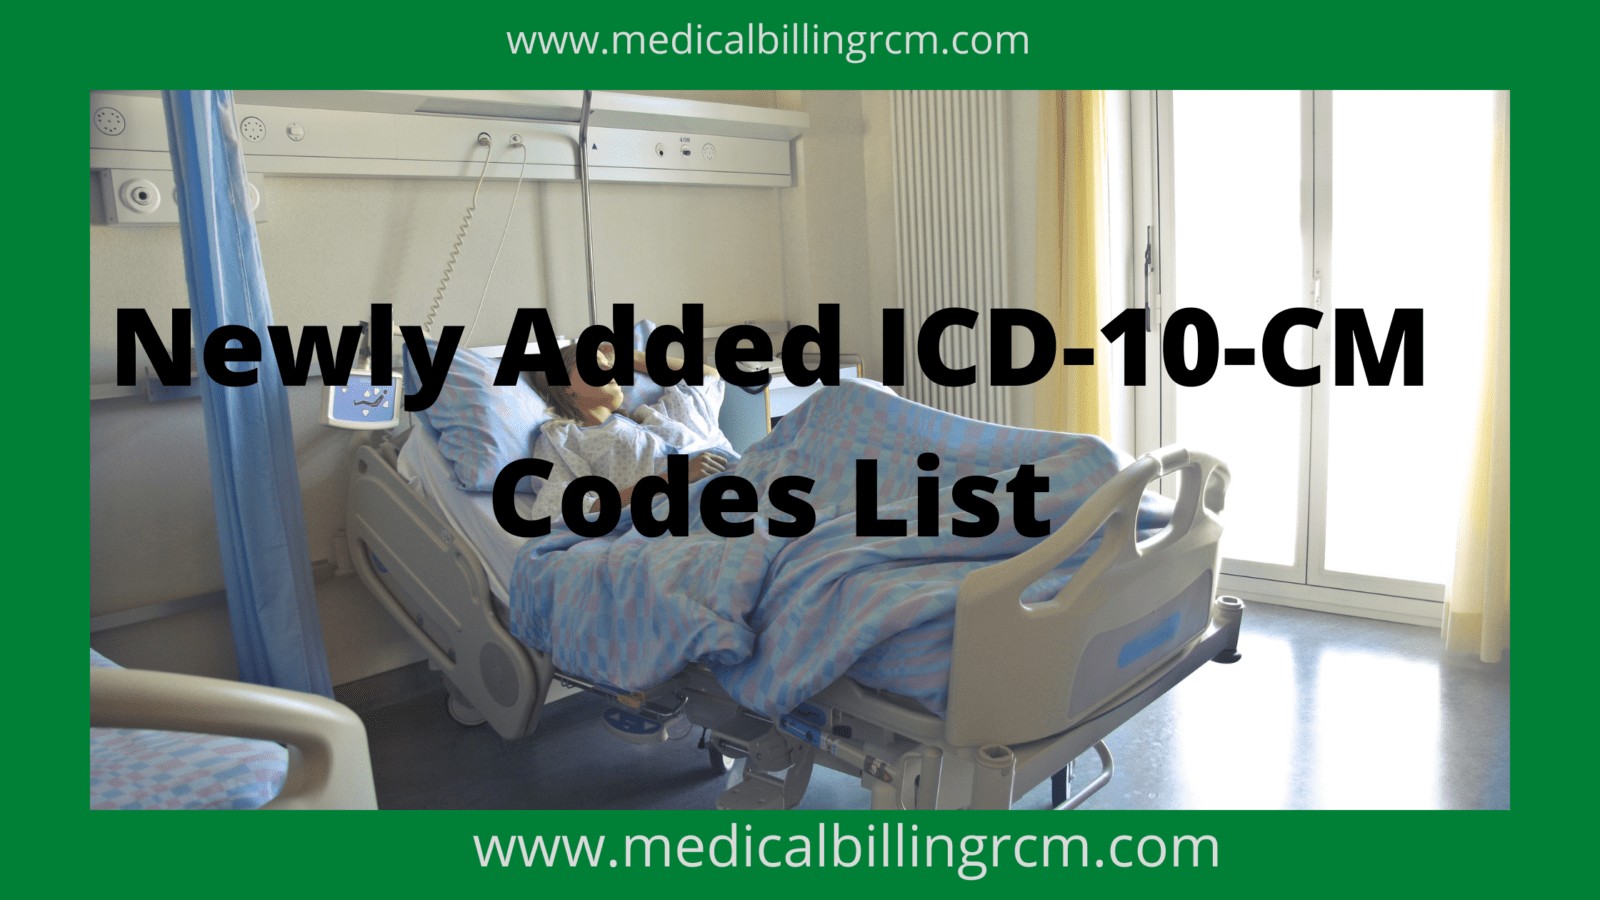 newly added icd-10-cm codes